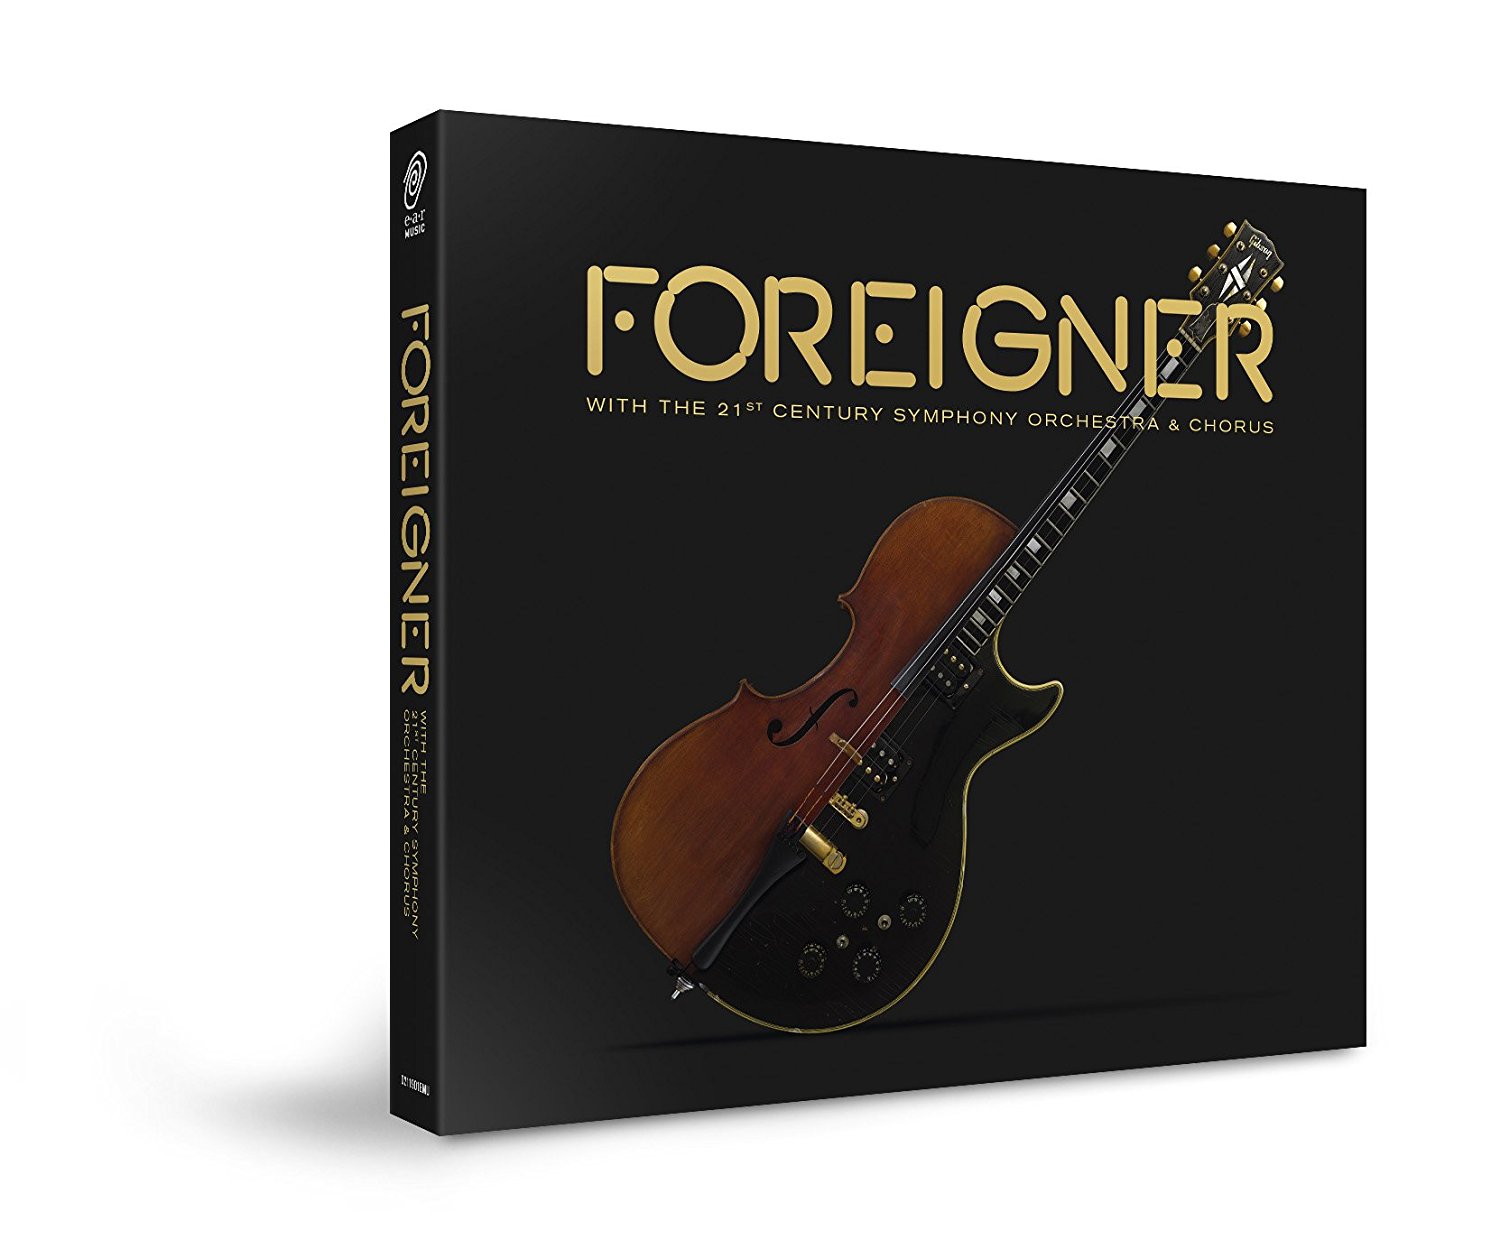 Chorus orchestra. Foreigner - with the 21st Century Symphony Orchestra & Chorus (2018). With the 21st Century Symphony Orchestra & Chorus. Foreigner Double Vision обложка. Foreigner with the 21st Century Orchestra and Choir.